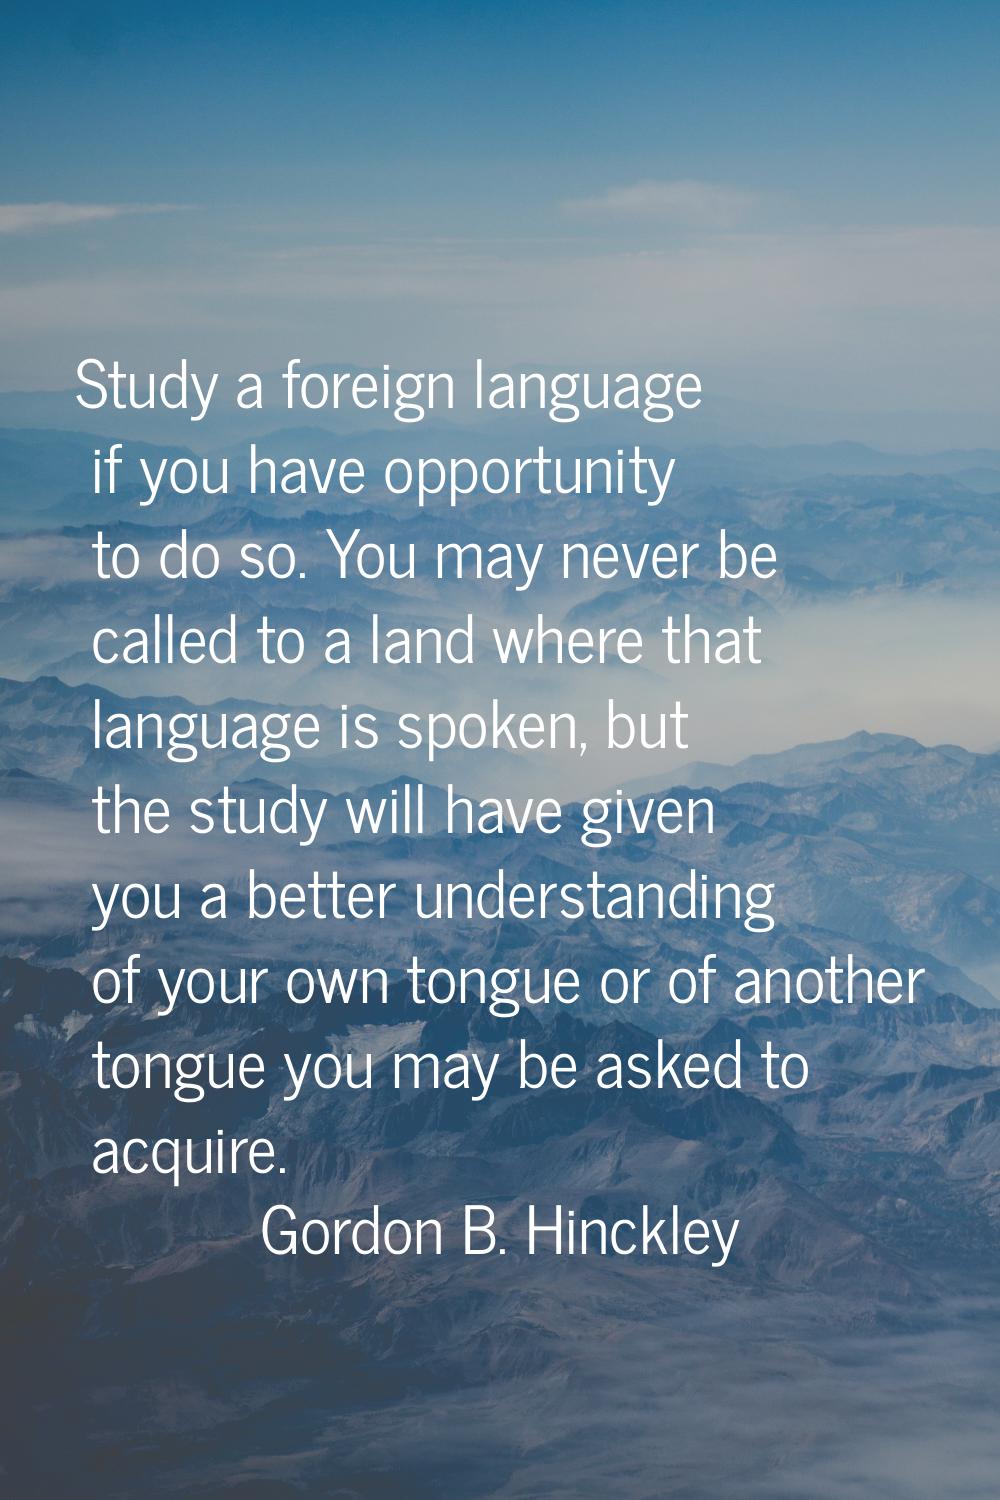 Study a foreign language if you have opportunity to do so. You may never be called to a land where 